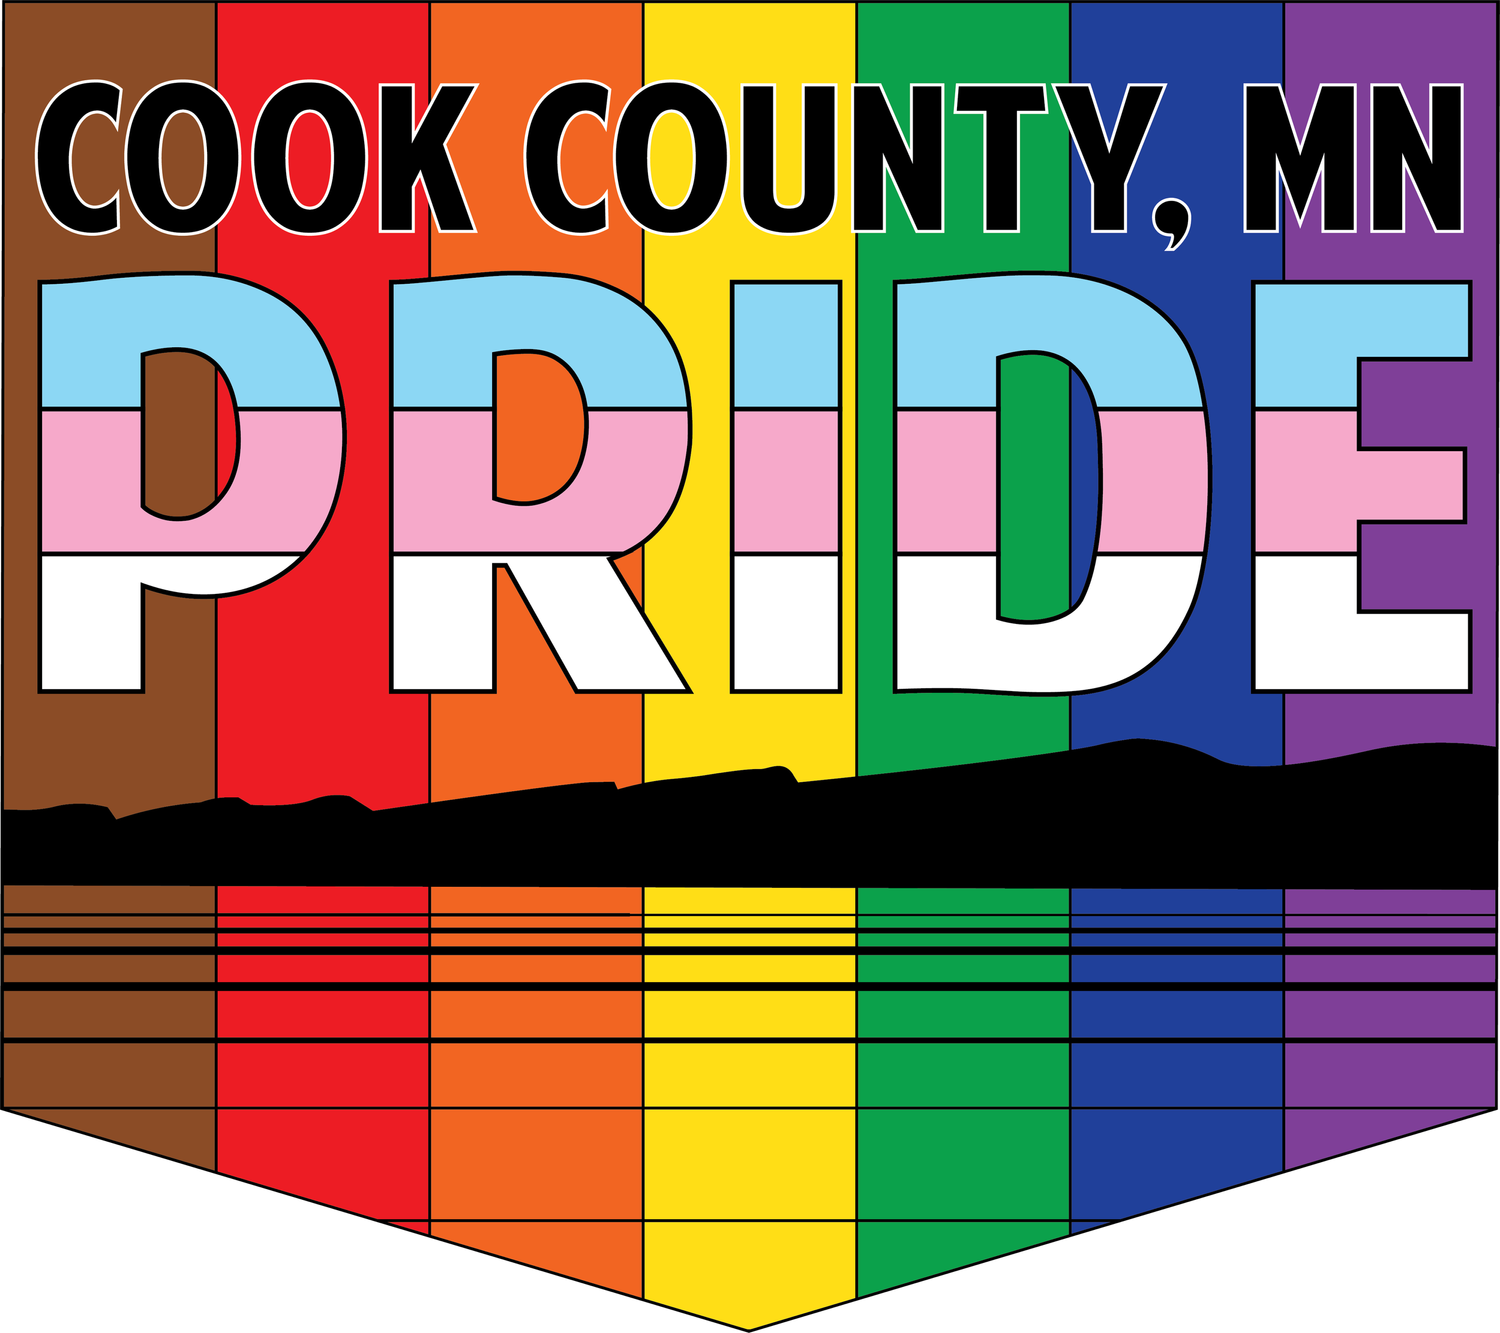 Cook County Pride